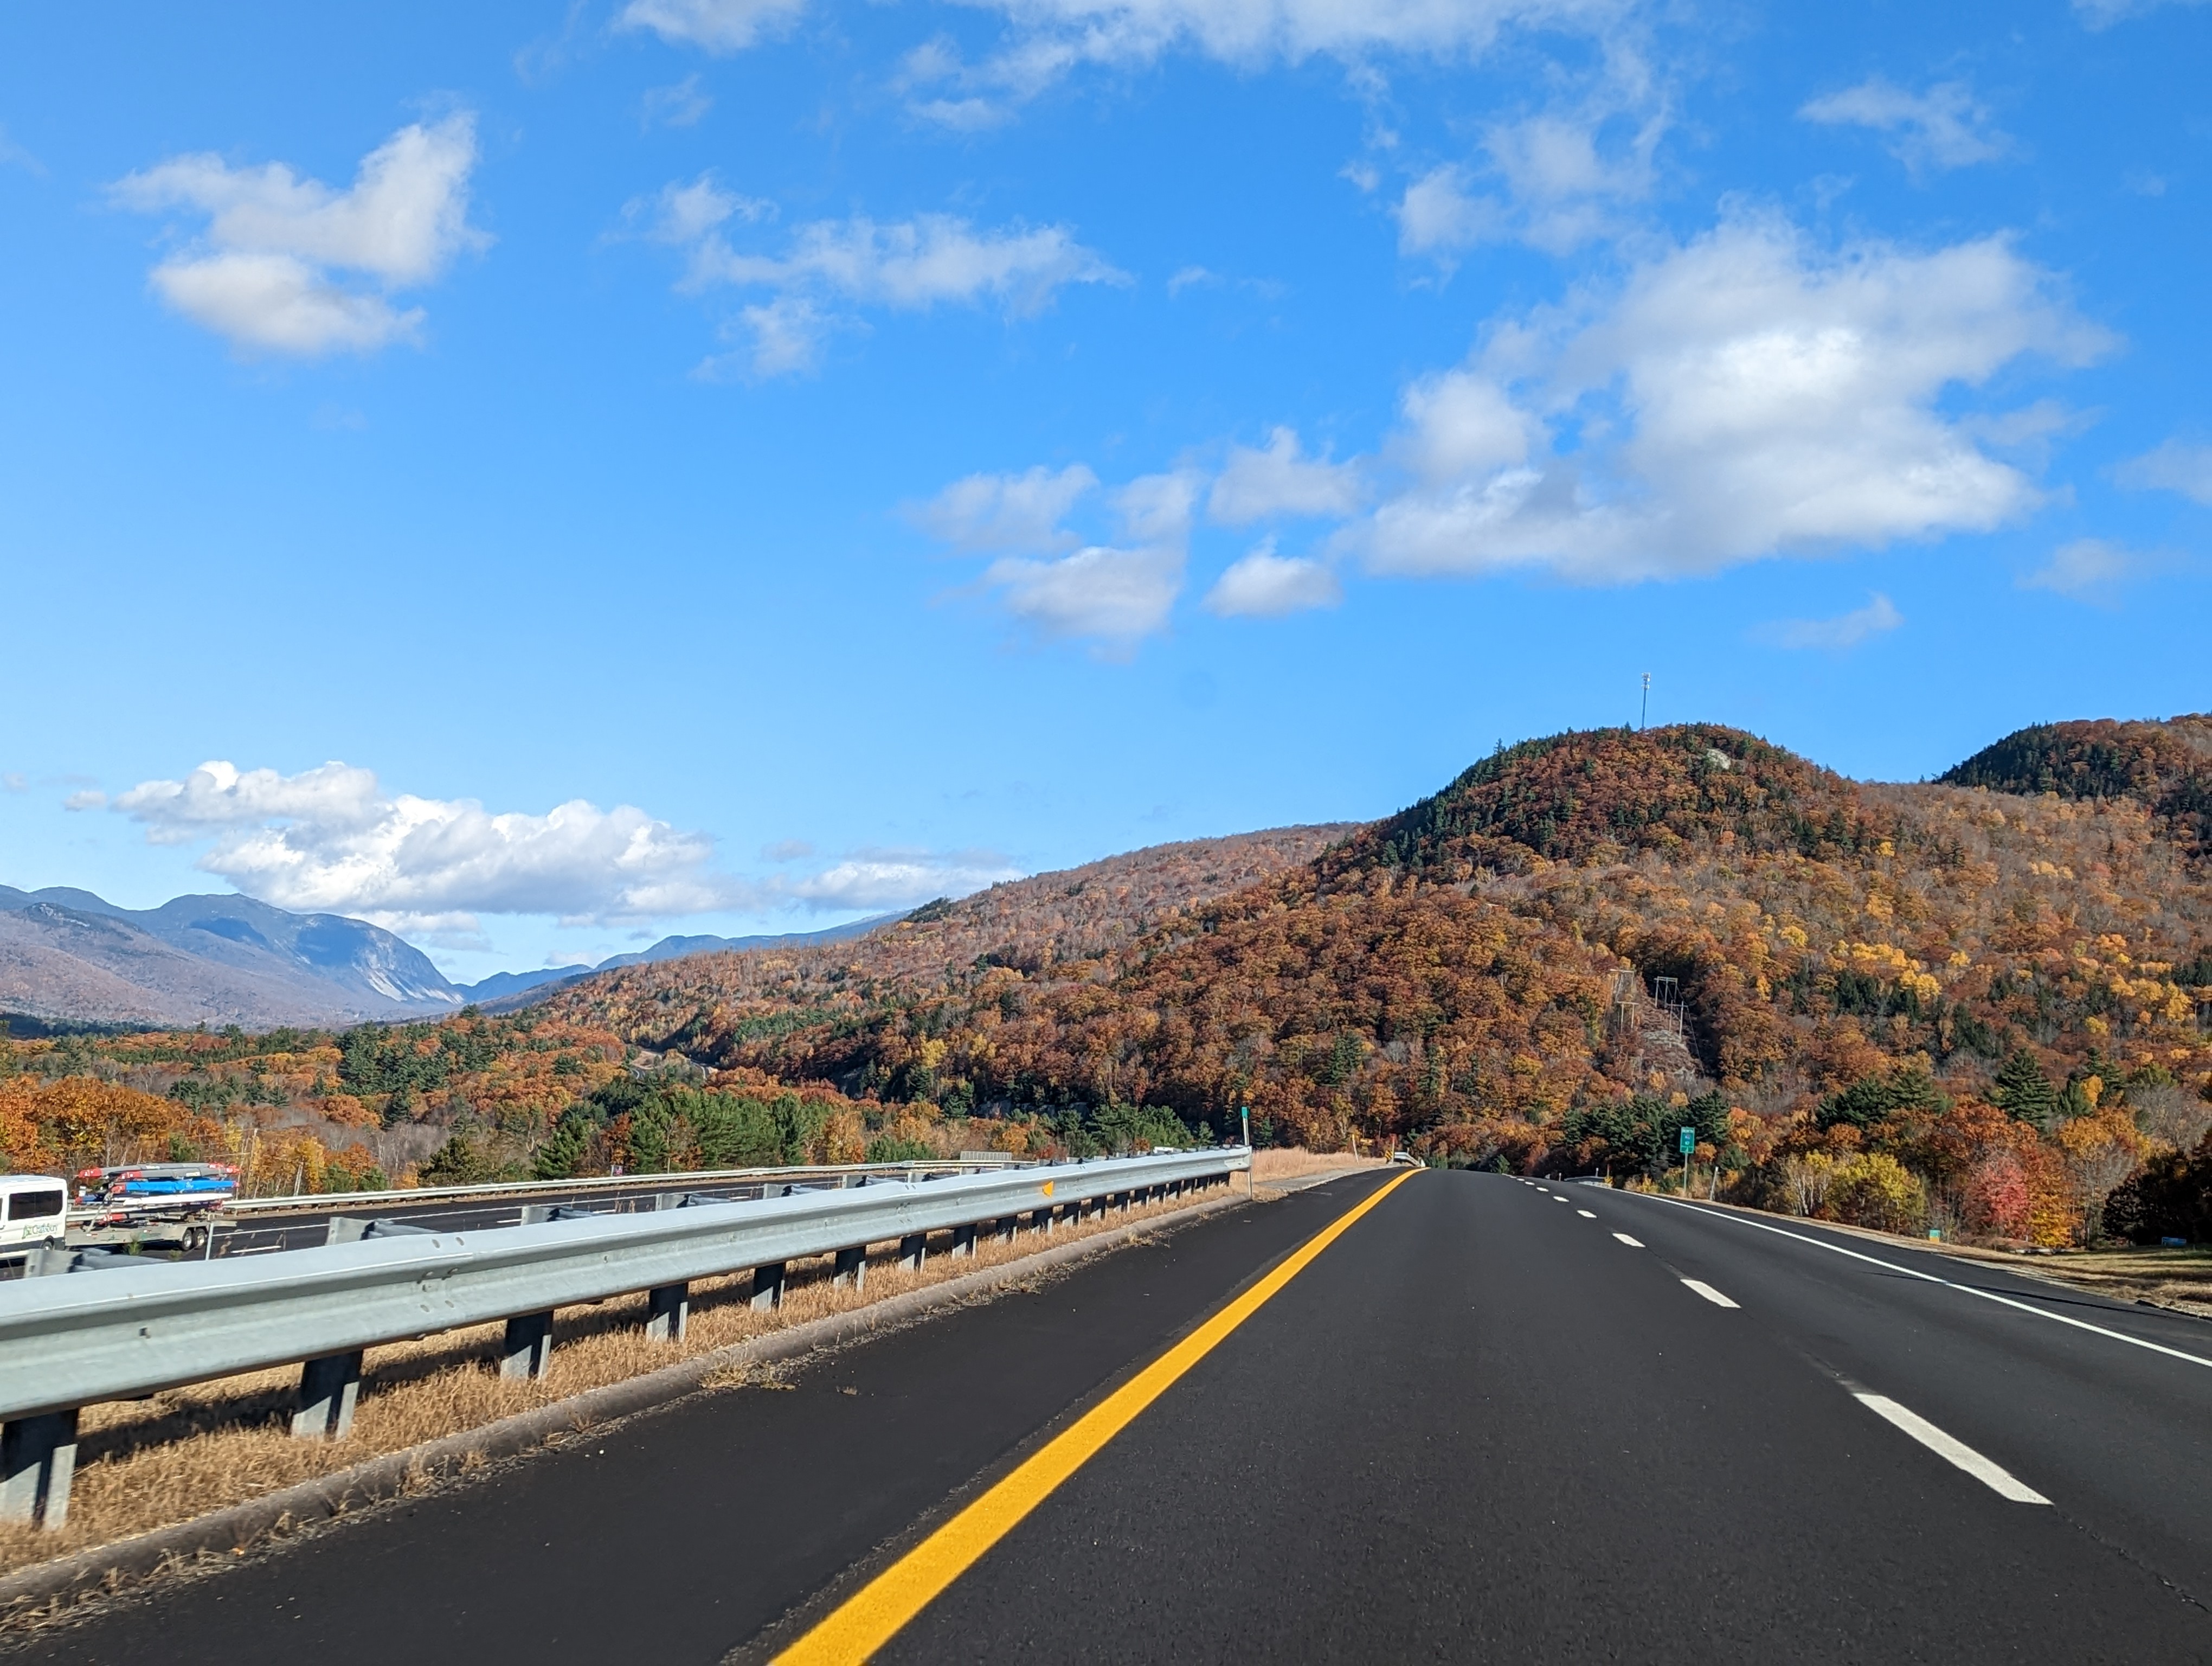 A scenic drive on a clear autumn day through the White Mountains, New Hampshire, with a road leading towards vibrant fall foliage and a mountainous horizon under a blue sky with fluffy clouds.